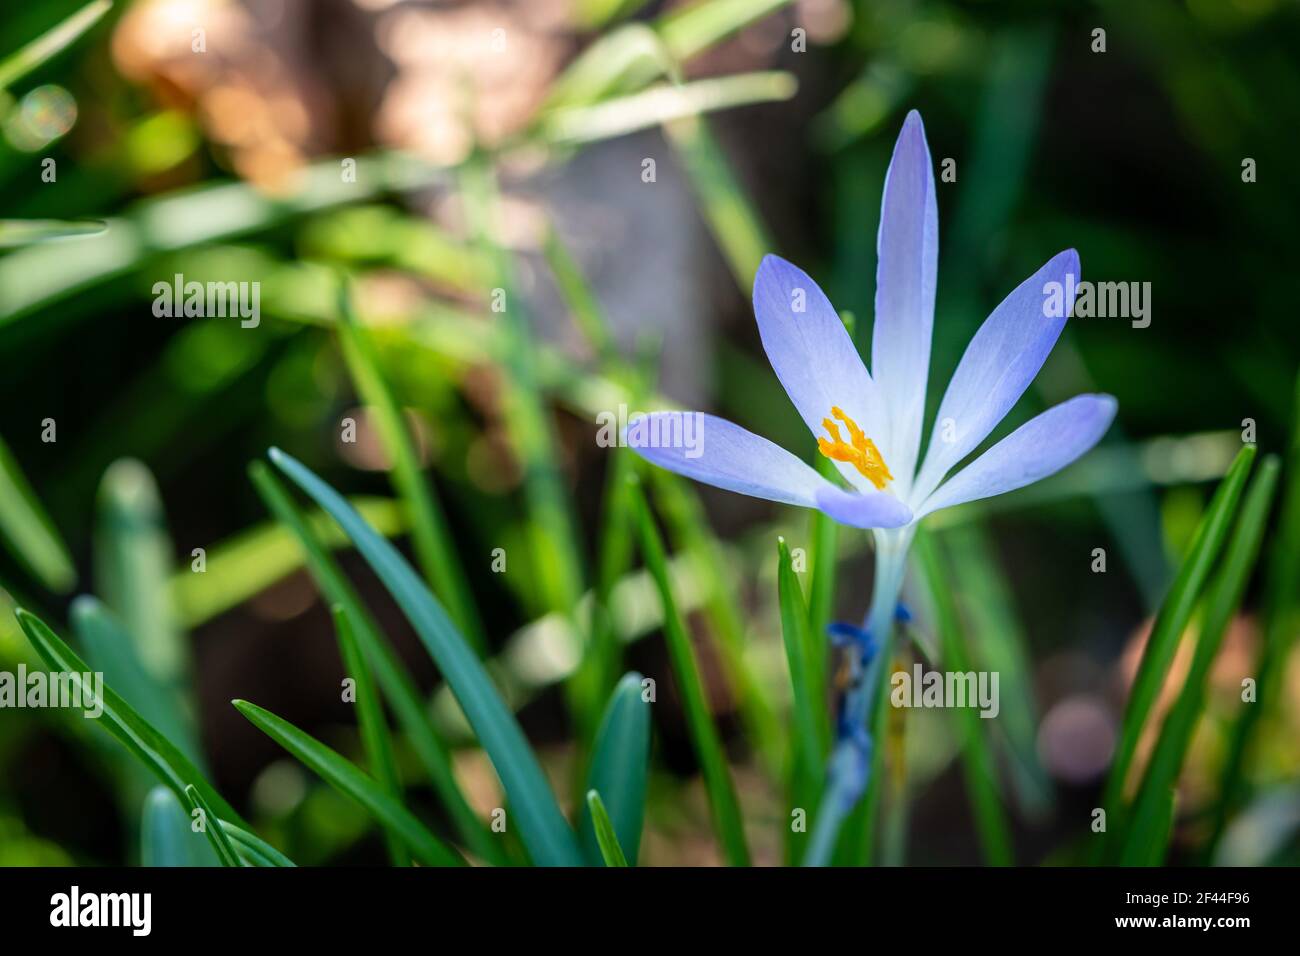 Blue crocus with vibrant orange stamen growing through blades of grass. Wild spring flower brightly lit by sunlight in spring and Easter season. Stock Photo